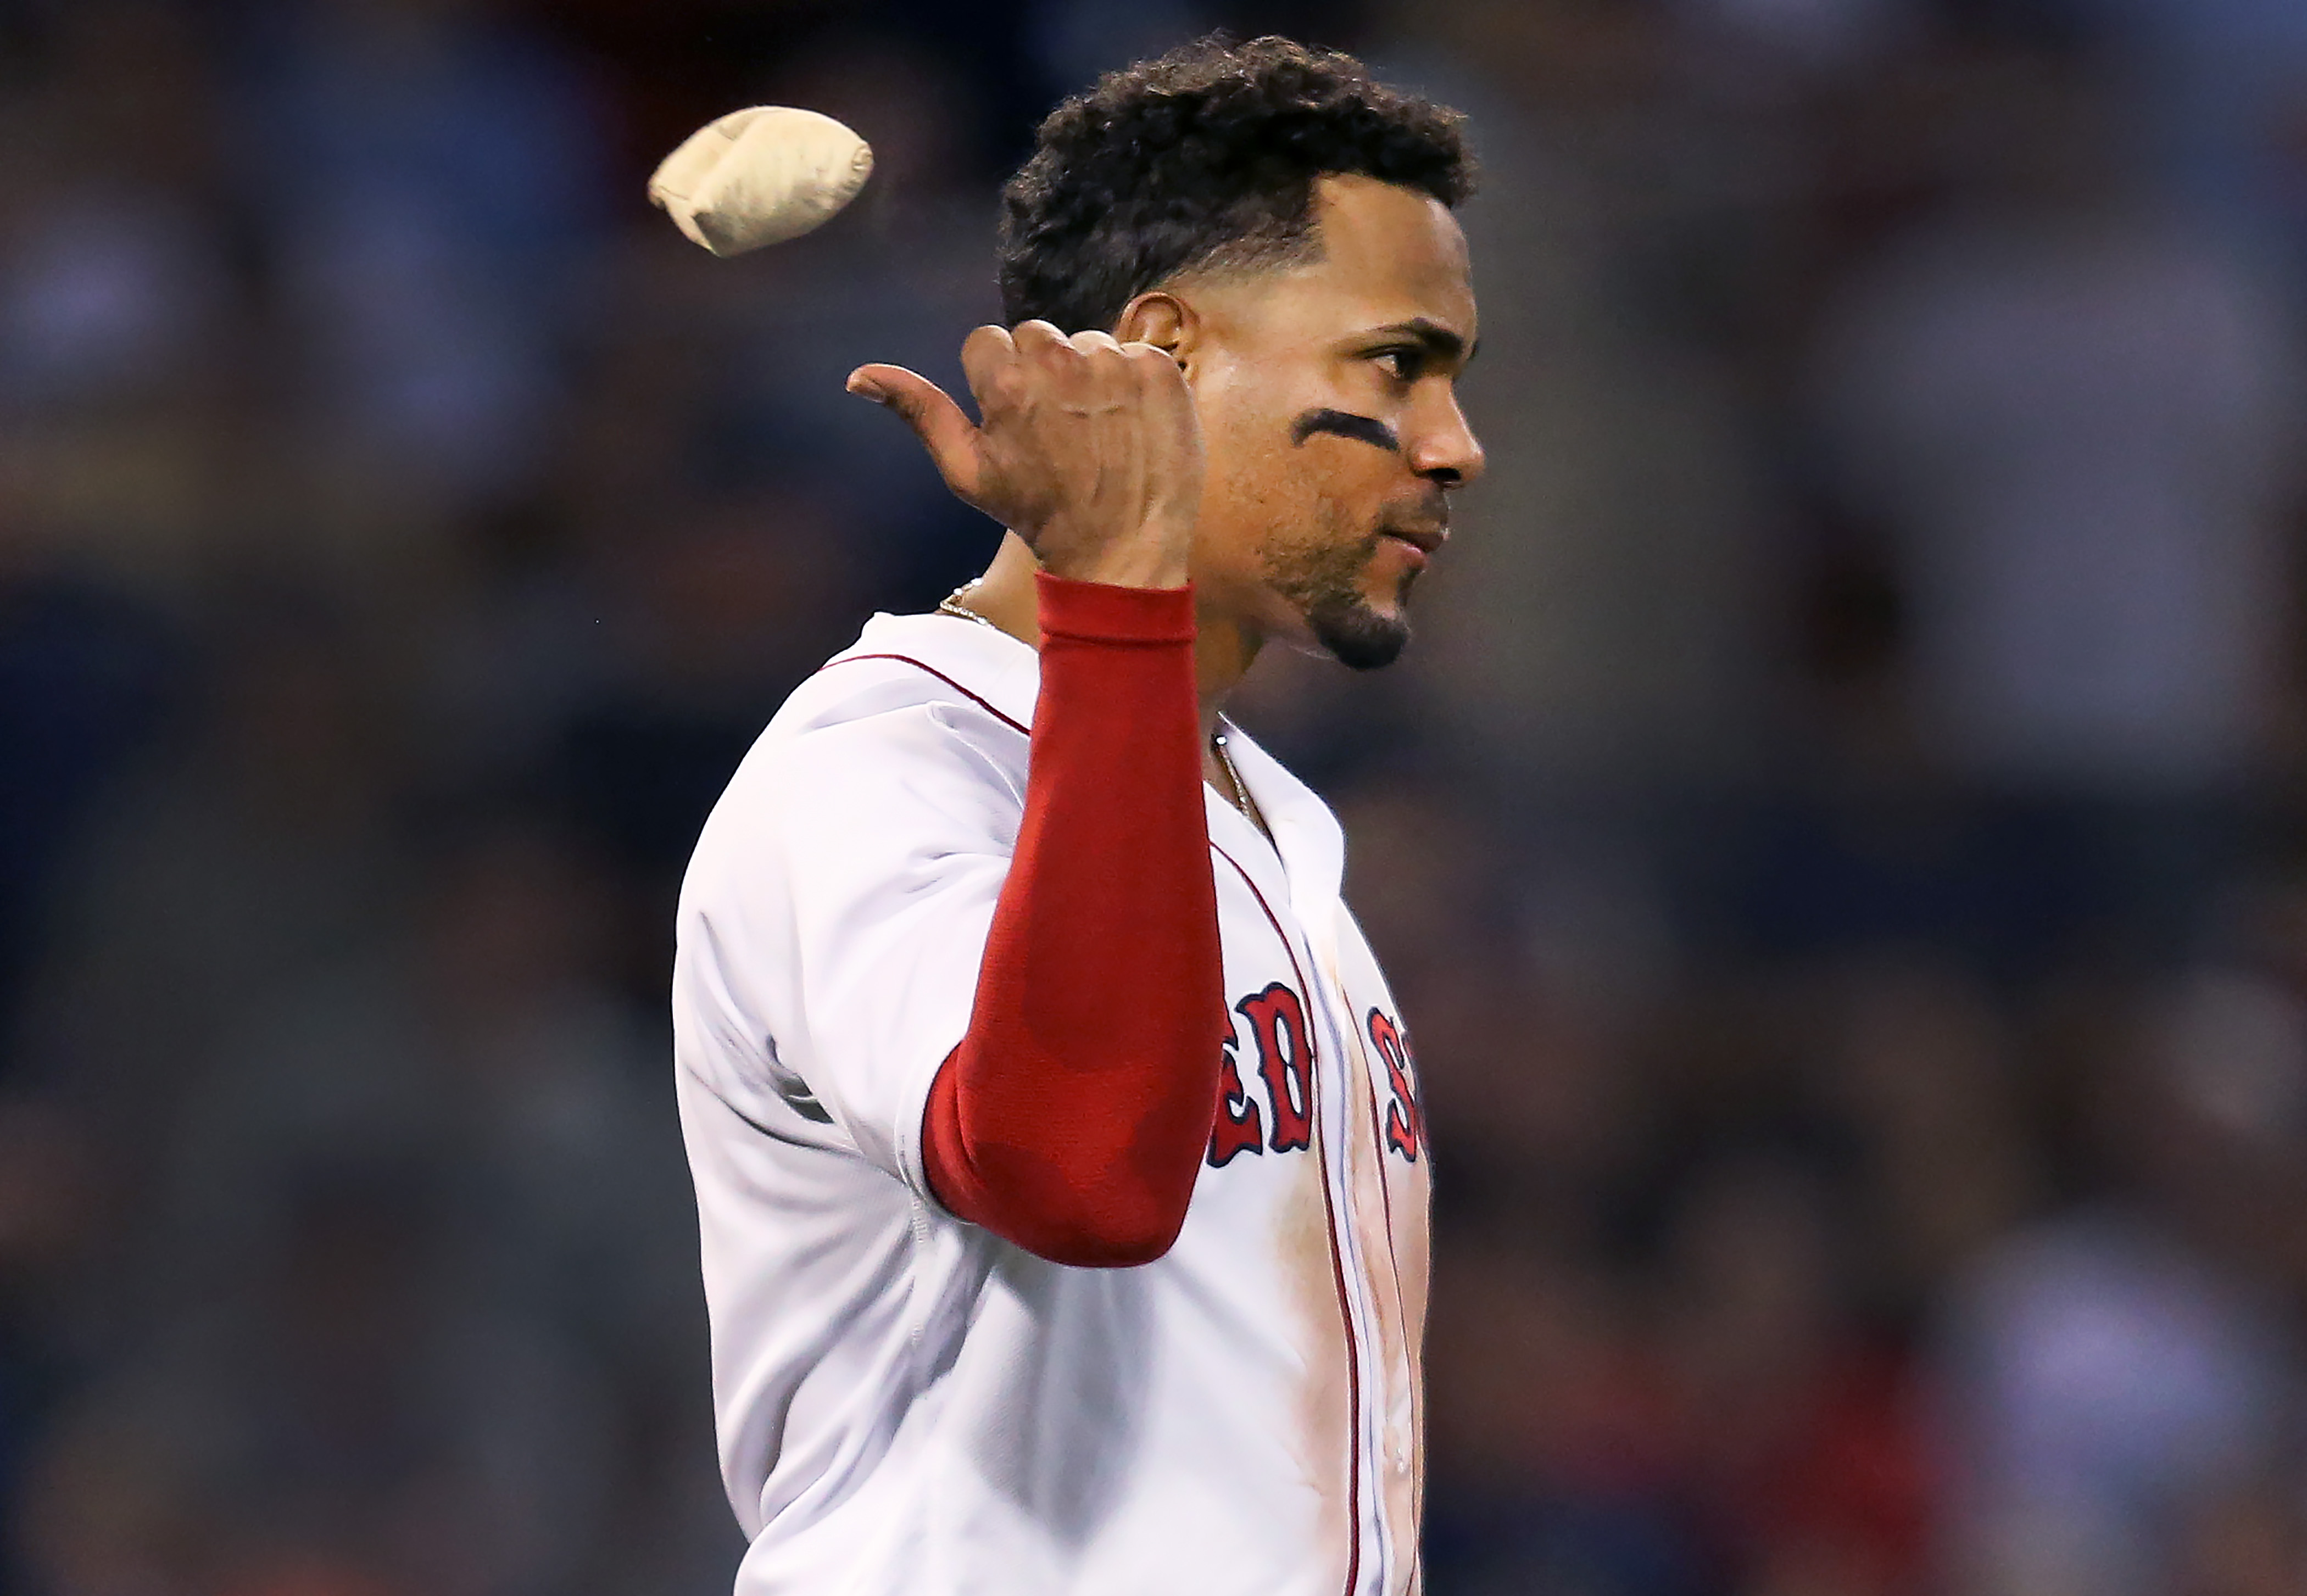 Xander Bogaerts learns he won't be traded, commits to pushing Red